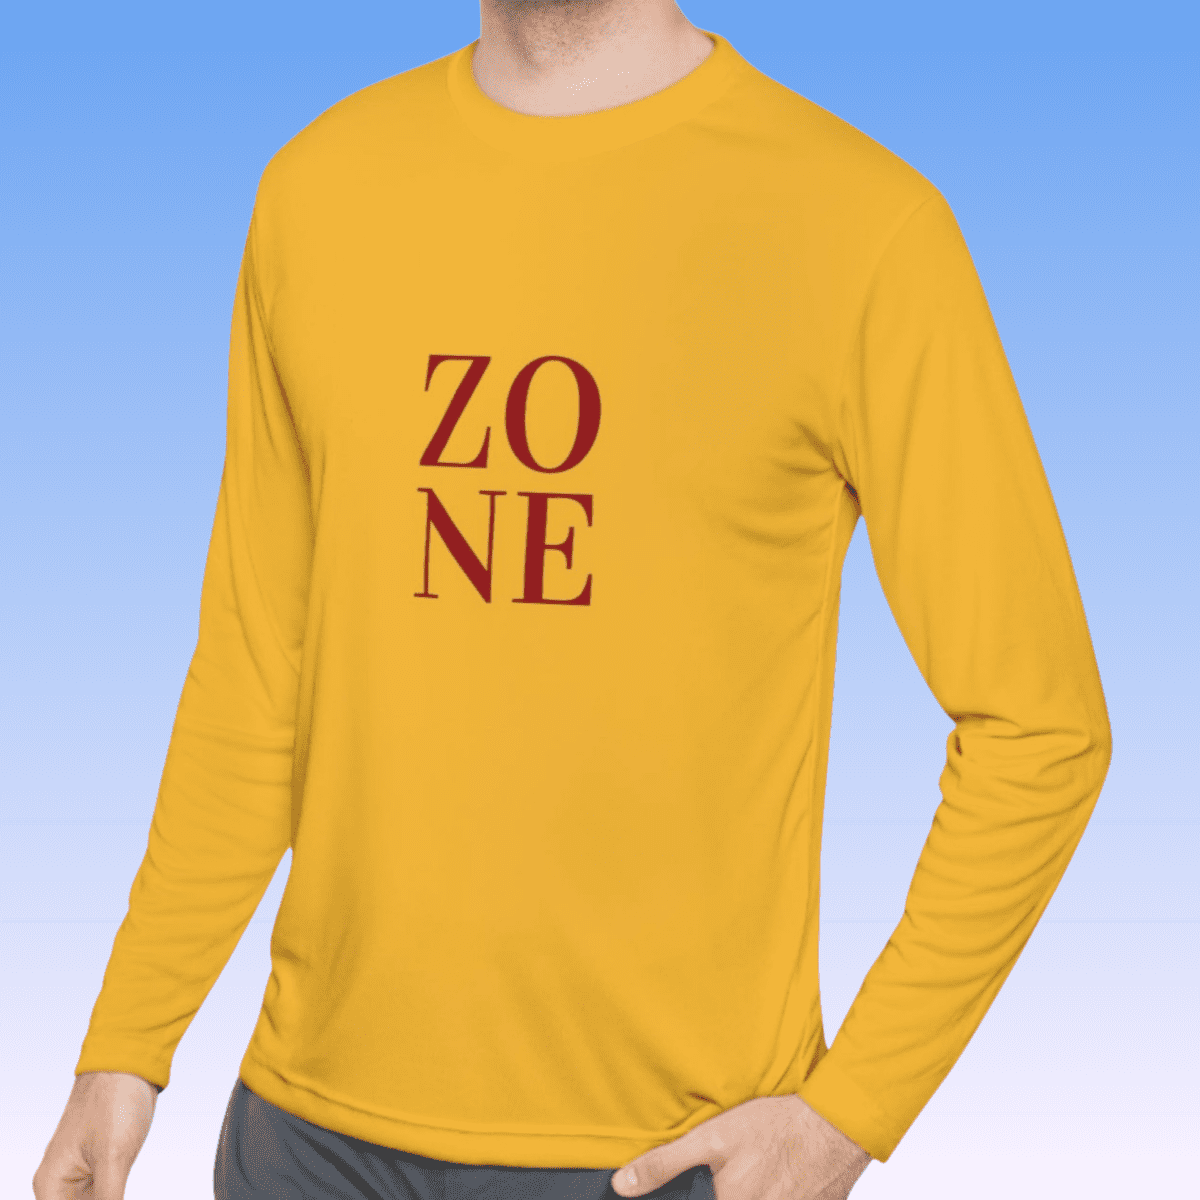 Gold Men's Zone Red Long Sleeve Moisture-Wicking Tee